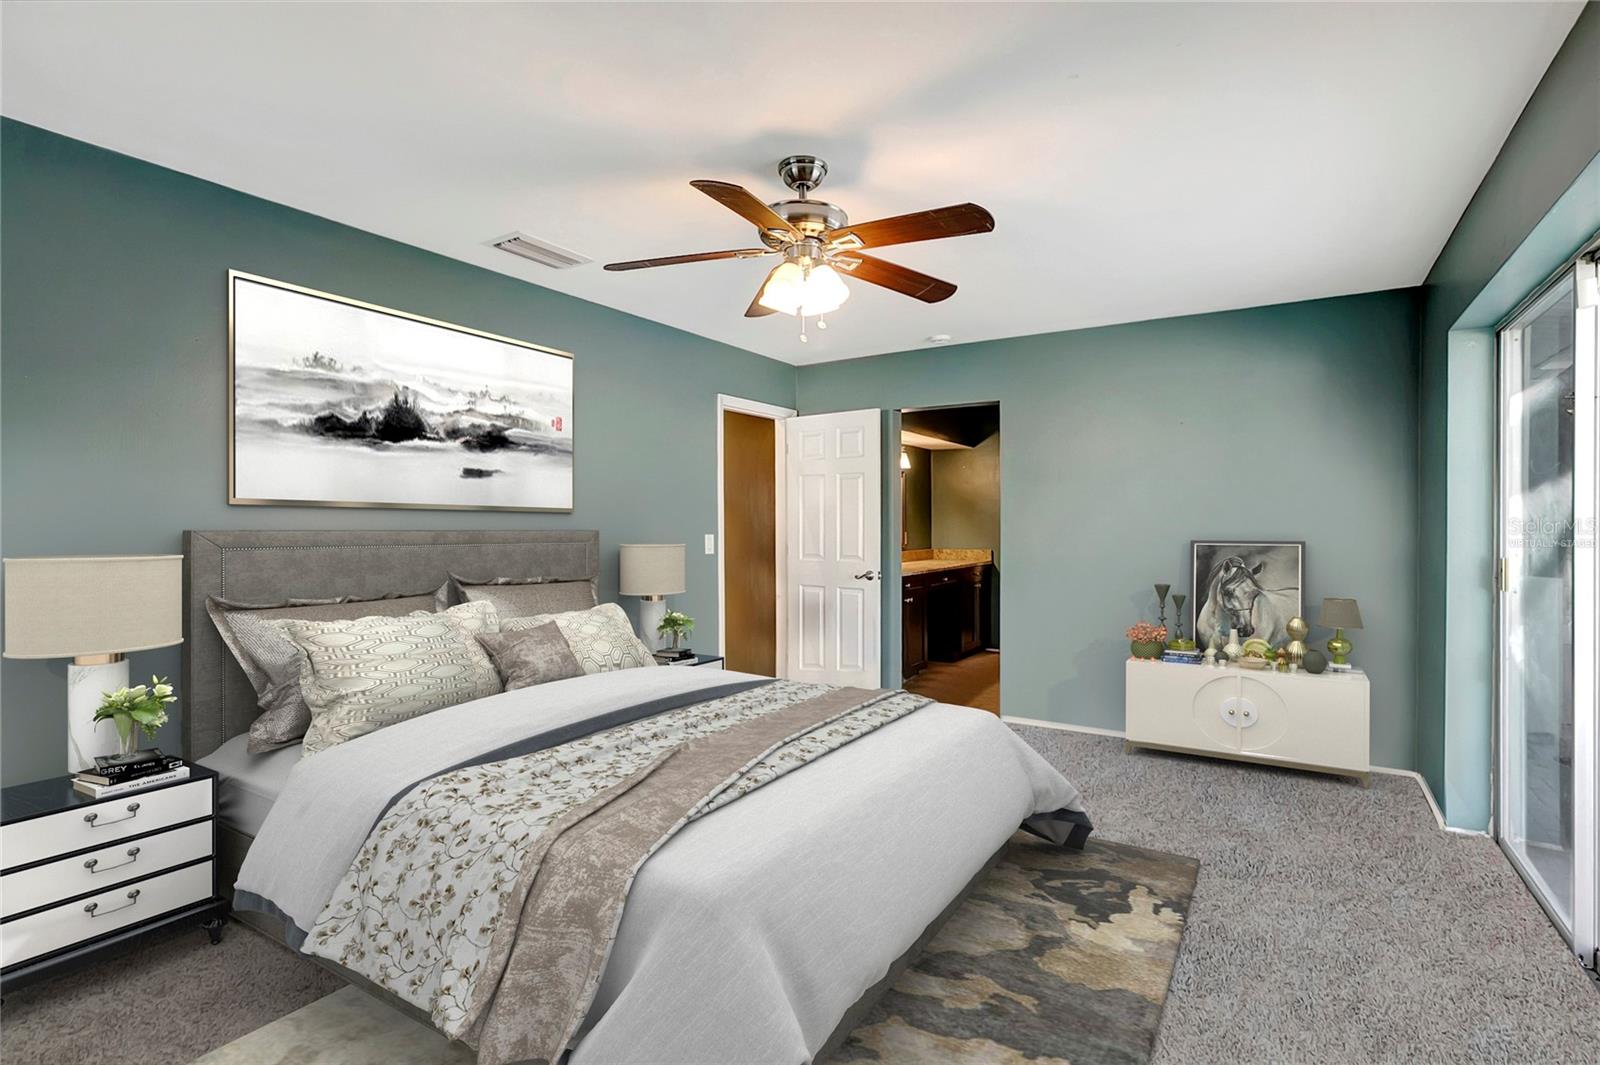 virtually staged- master bedroom has since been painted a neutral color and had new carpeting installed